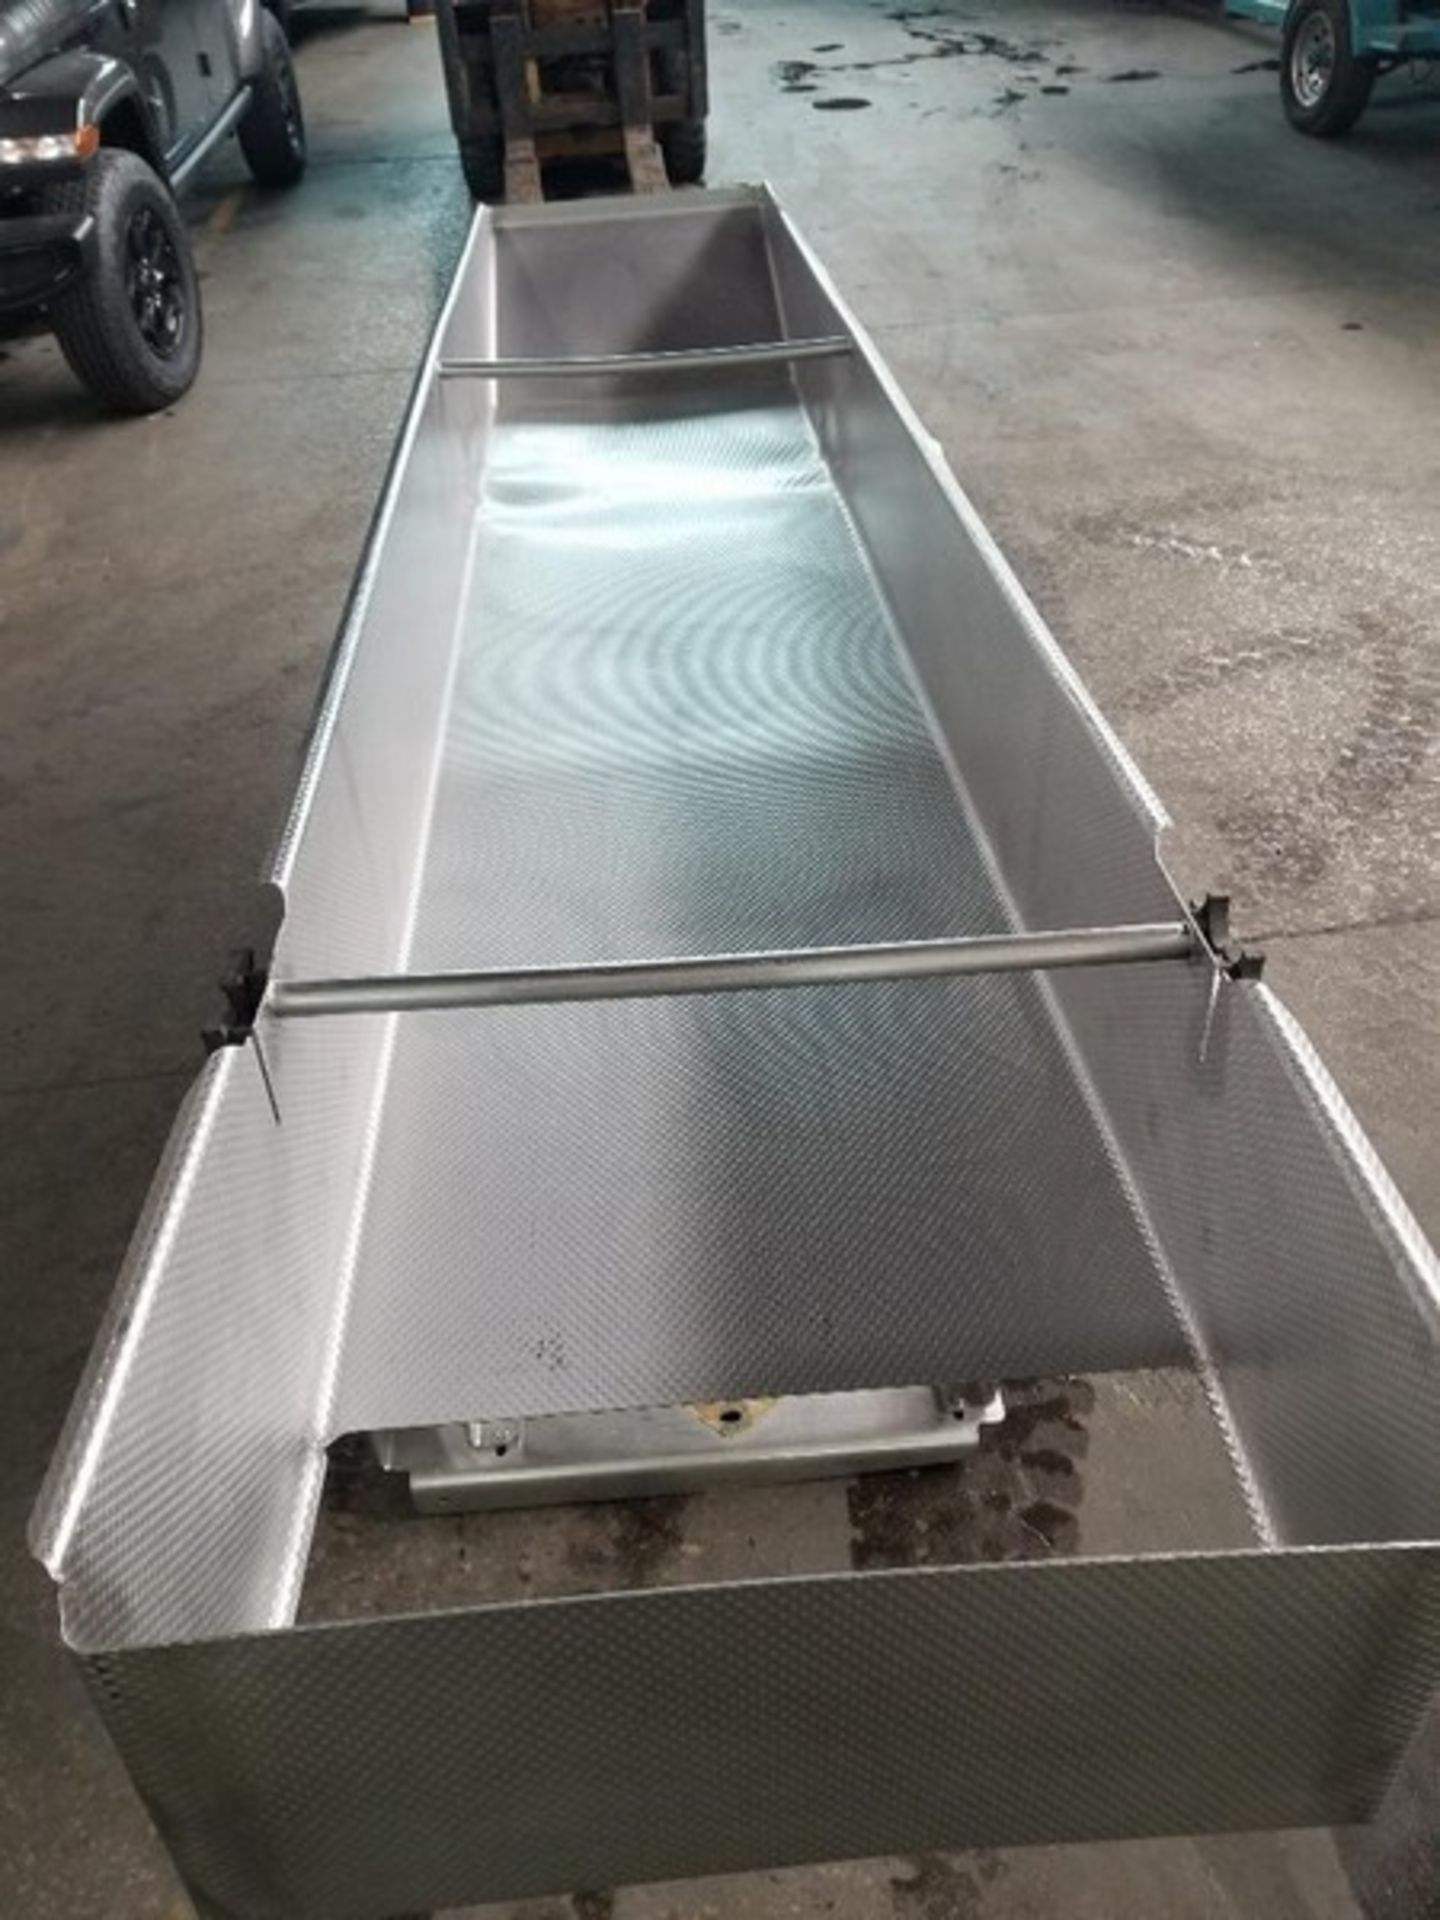 S/S Sanitary Vibratory Scale Feeder, Aprox. 24" W x 132" L. Last Used in Food Industry. Unit Removed - Image 9 of 9